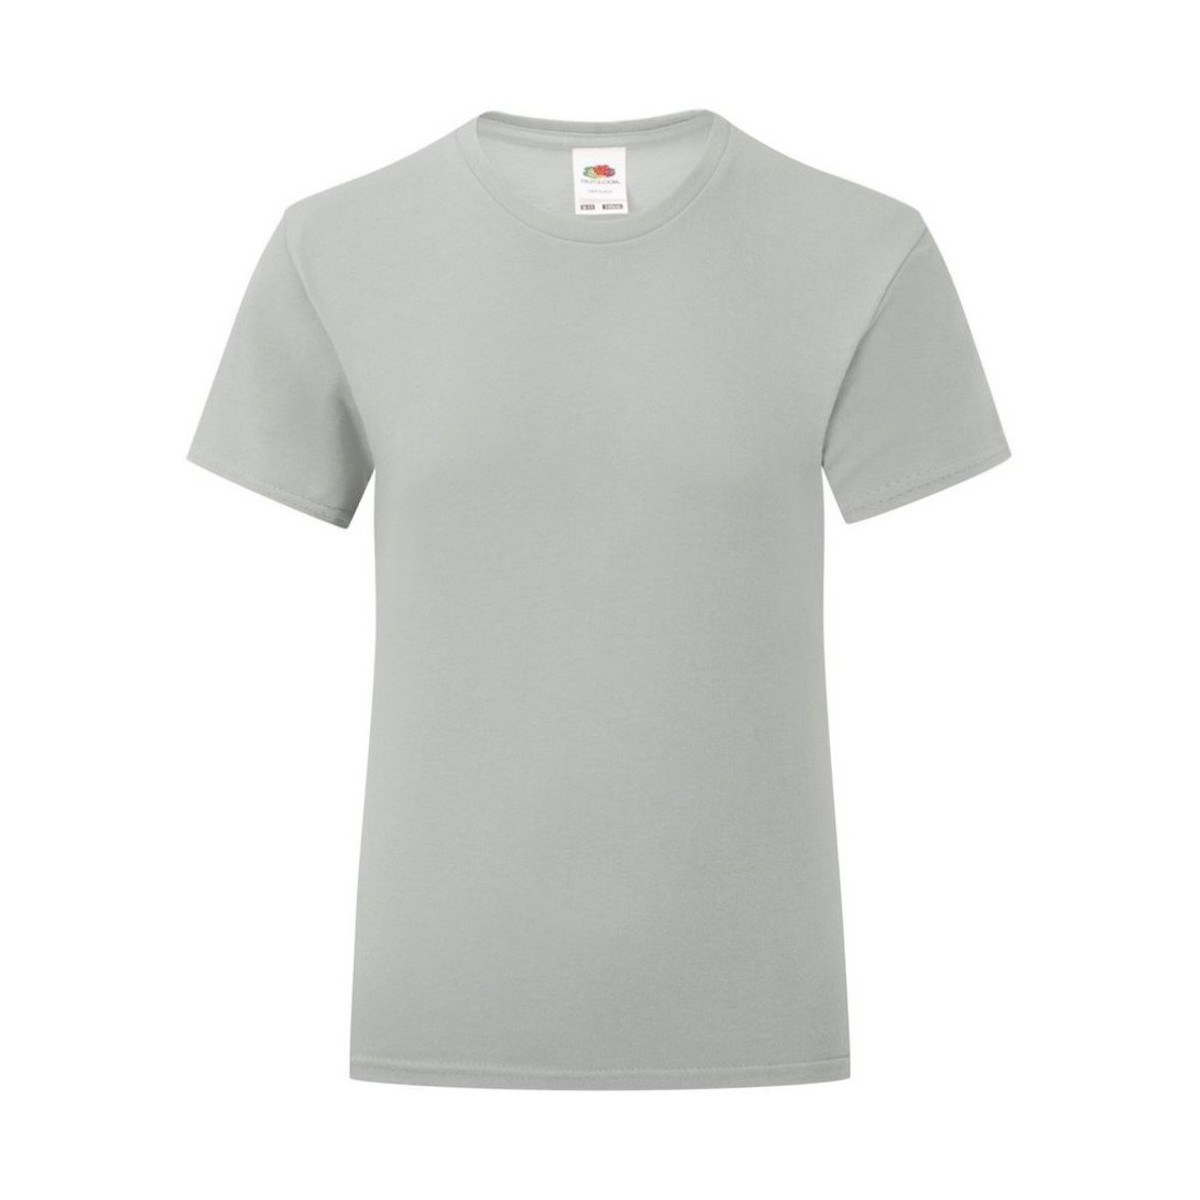 Vêtements Fille T-shirts manches longues Fruit Of The Loom Iconic Gris